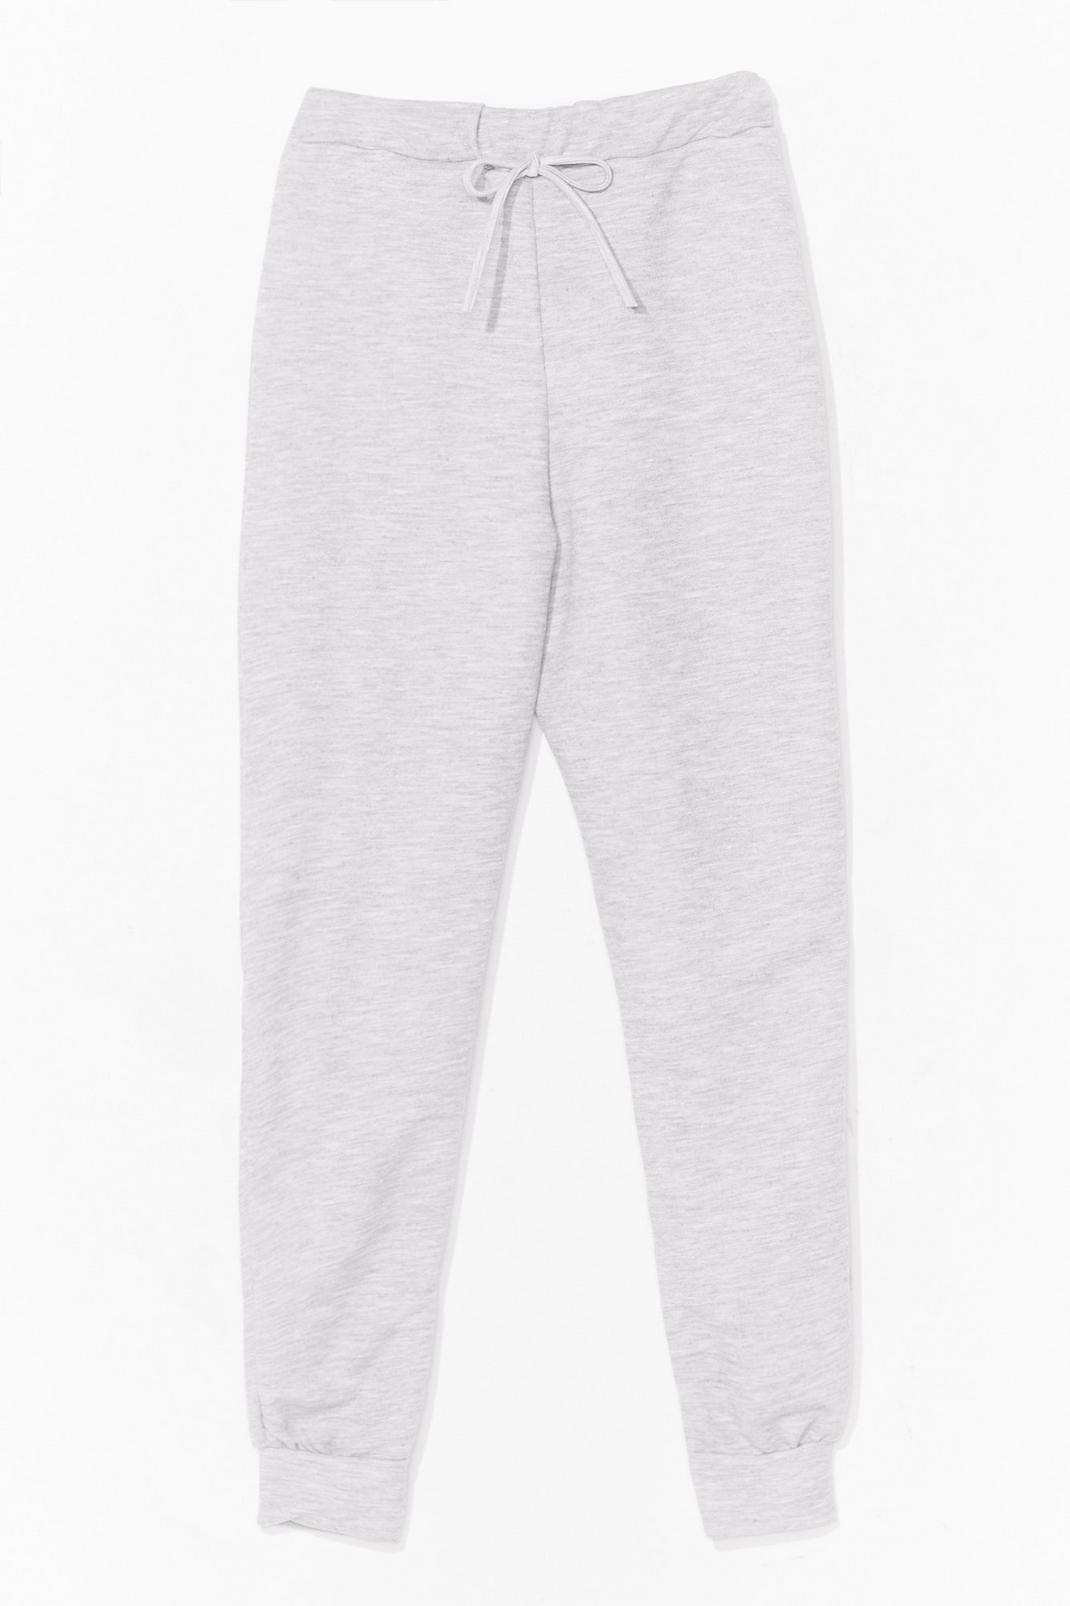 Grey There Chances Are Slim High-Waisted Sweatpants image number 1